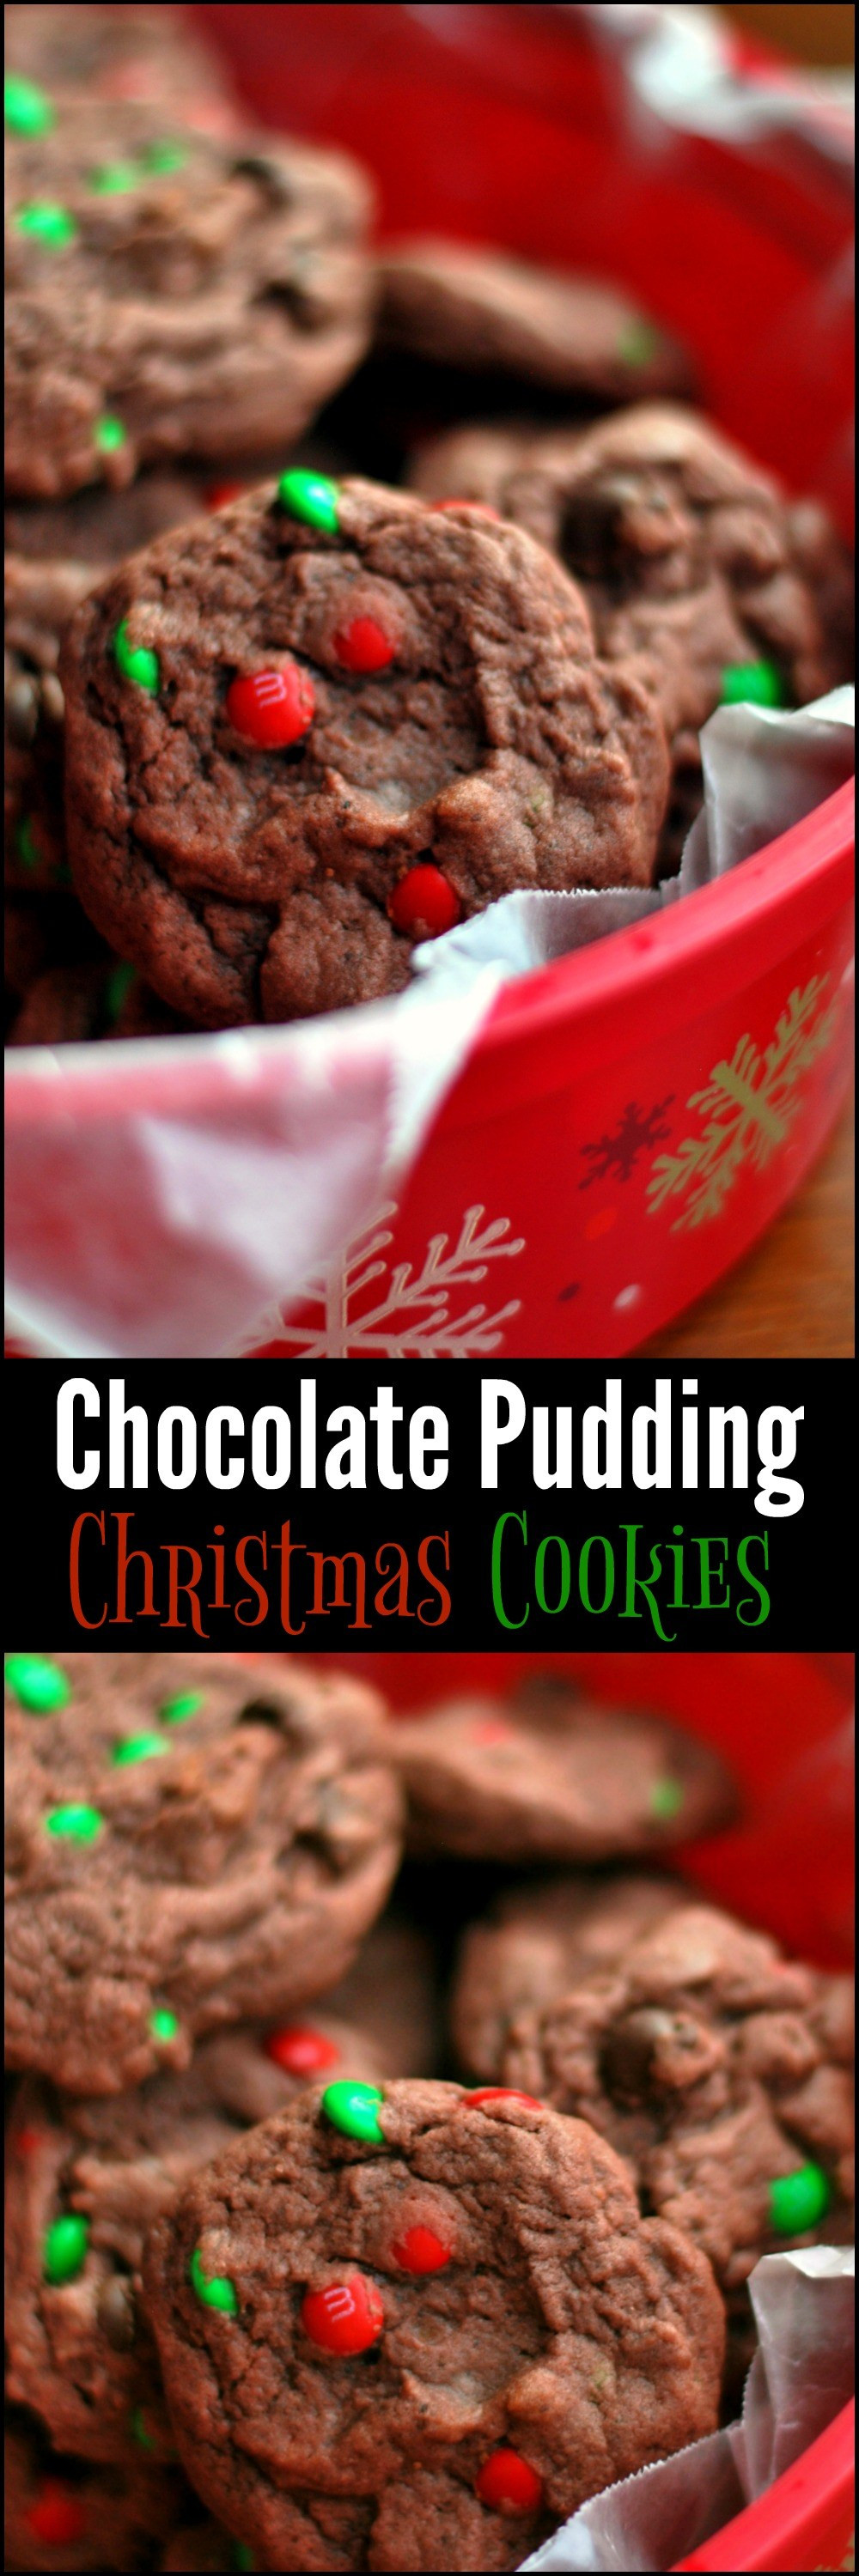 Christmas Chocolate Cookies
 Chocolate Pudding Christmas Cookies Aunt Bee s Recipes